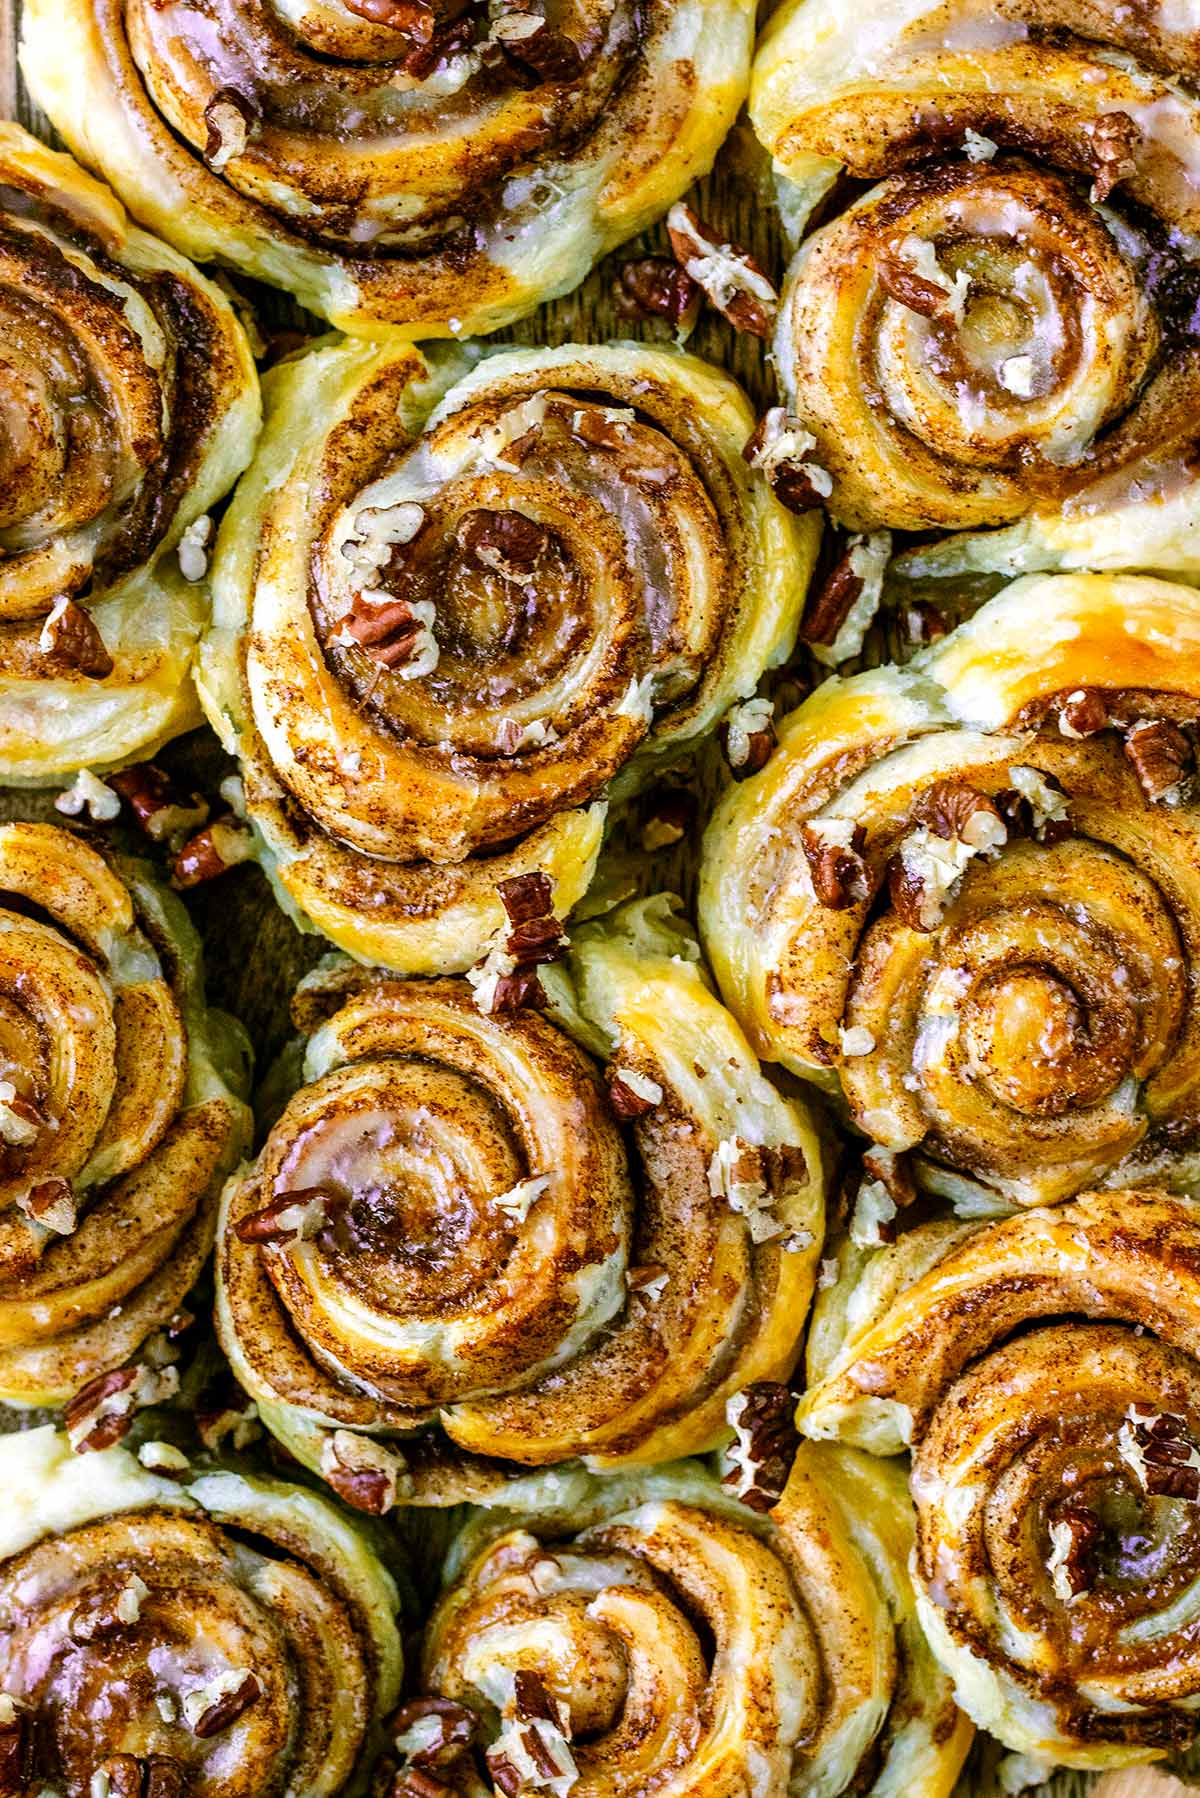 Cooked cinnamon swirls covered in icing and chopped pecans.